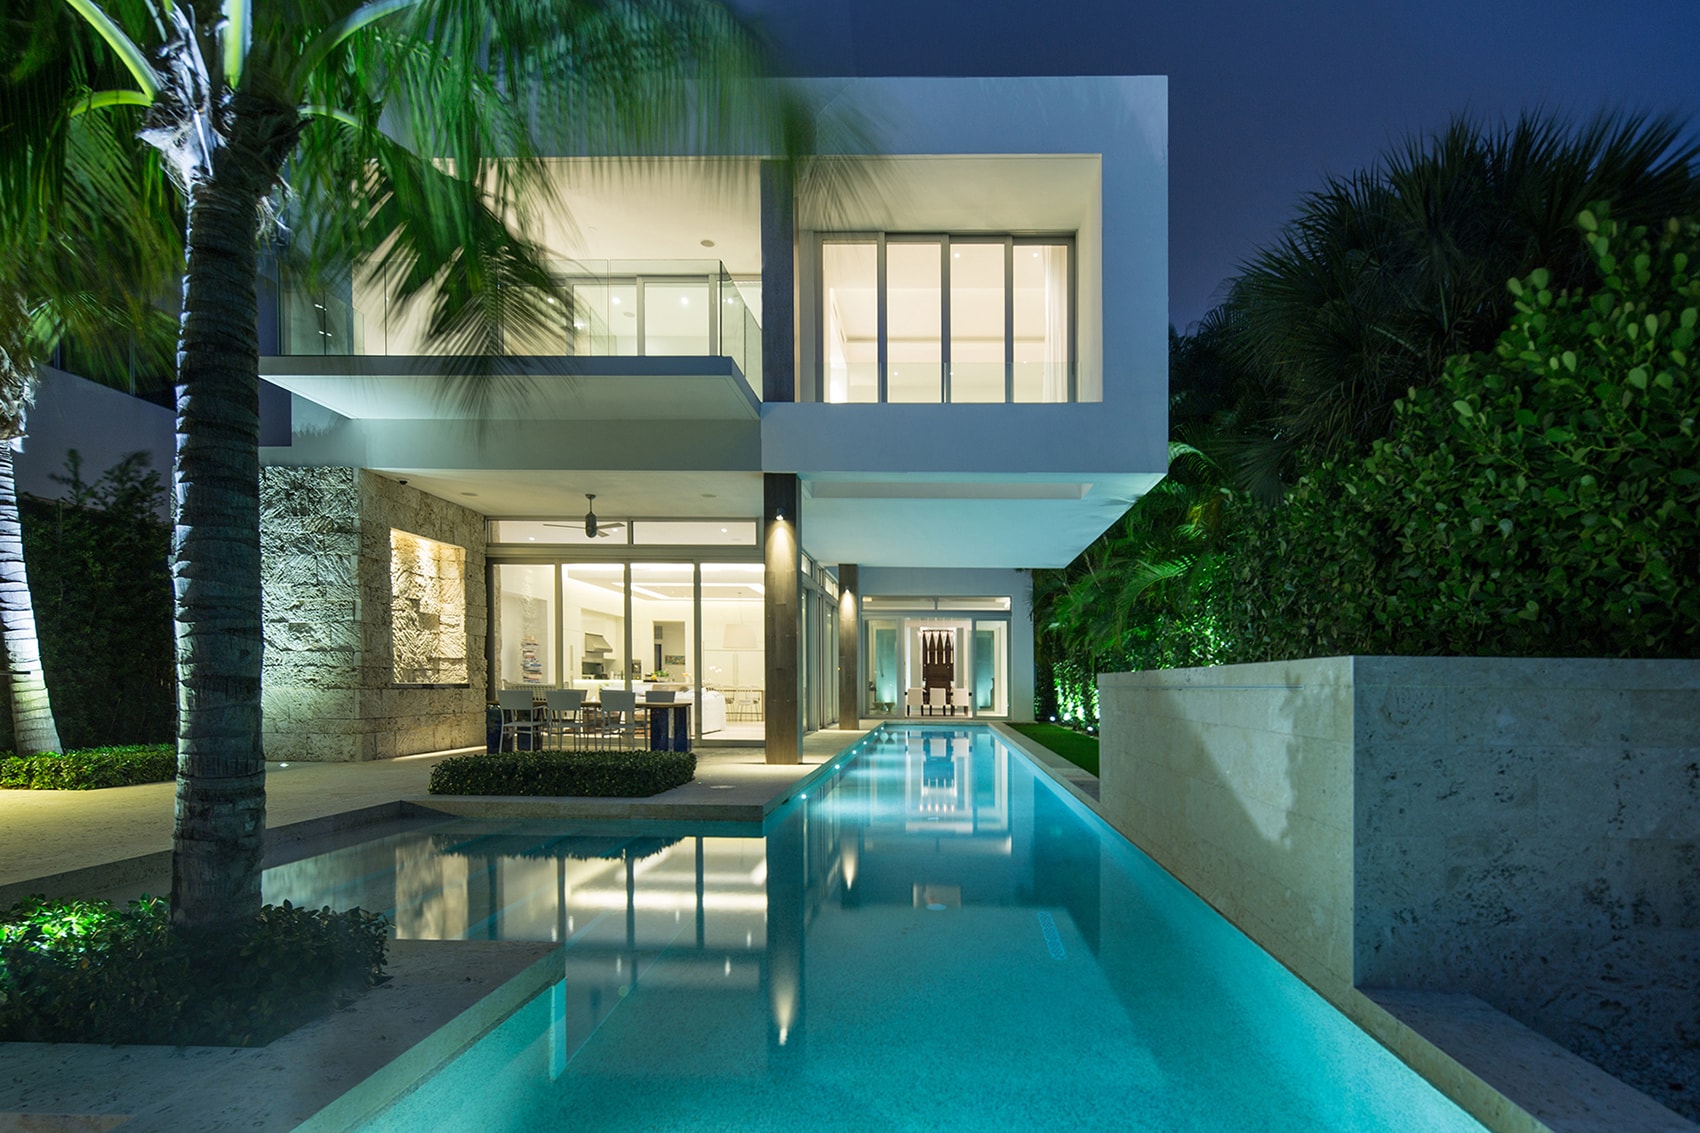 Amazing Houses: Living Modern With Style - Architecture Beast